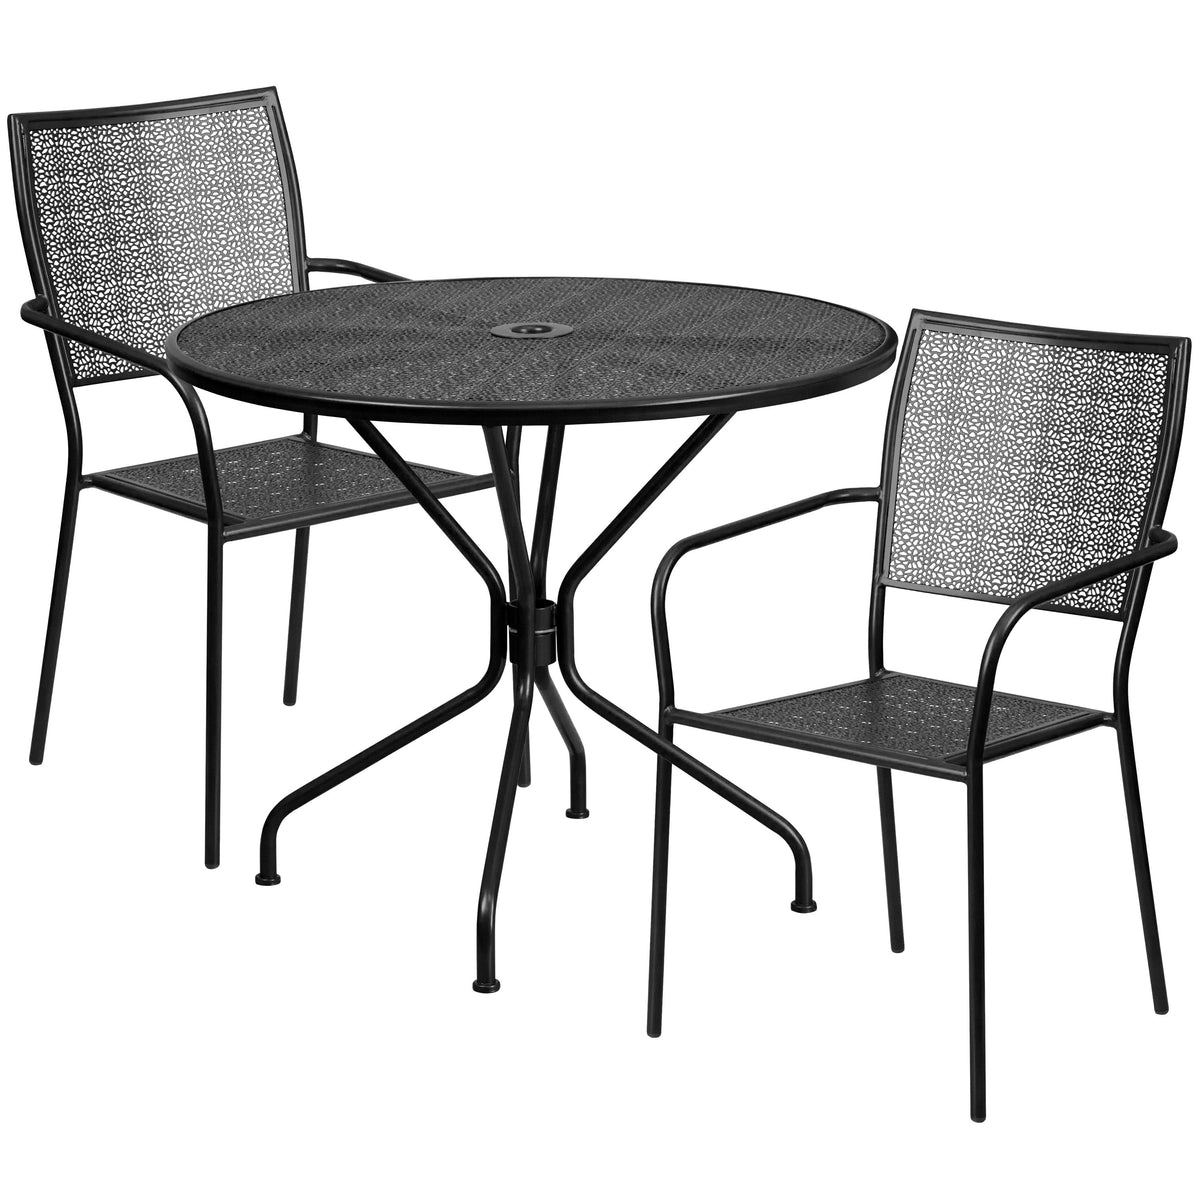 Black |#| 35.25inch Round Black Indoor-Outdoor Steel Patio Table Set w/ 2 Square Back Chairs